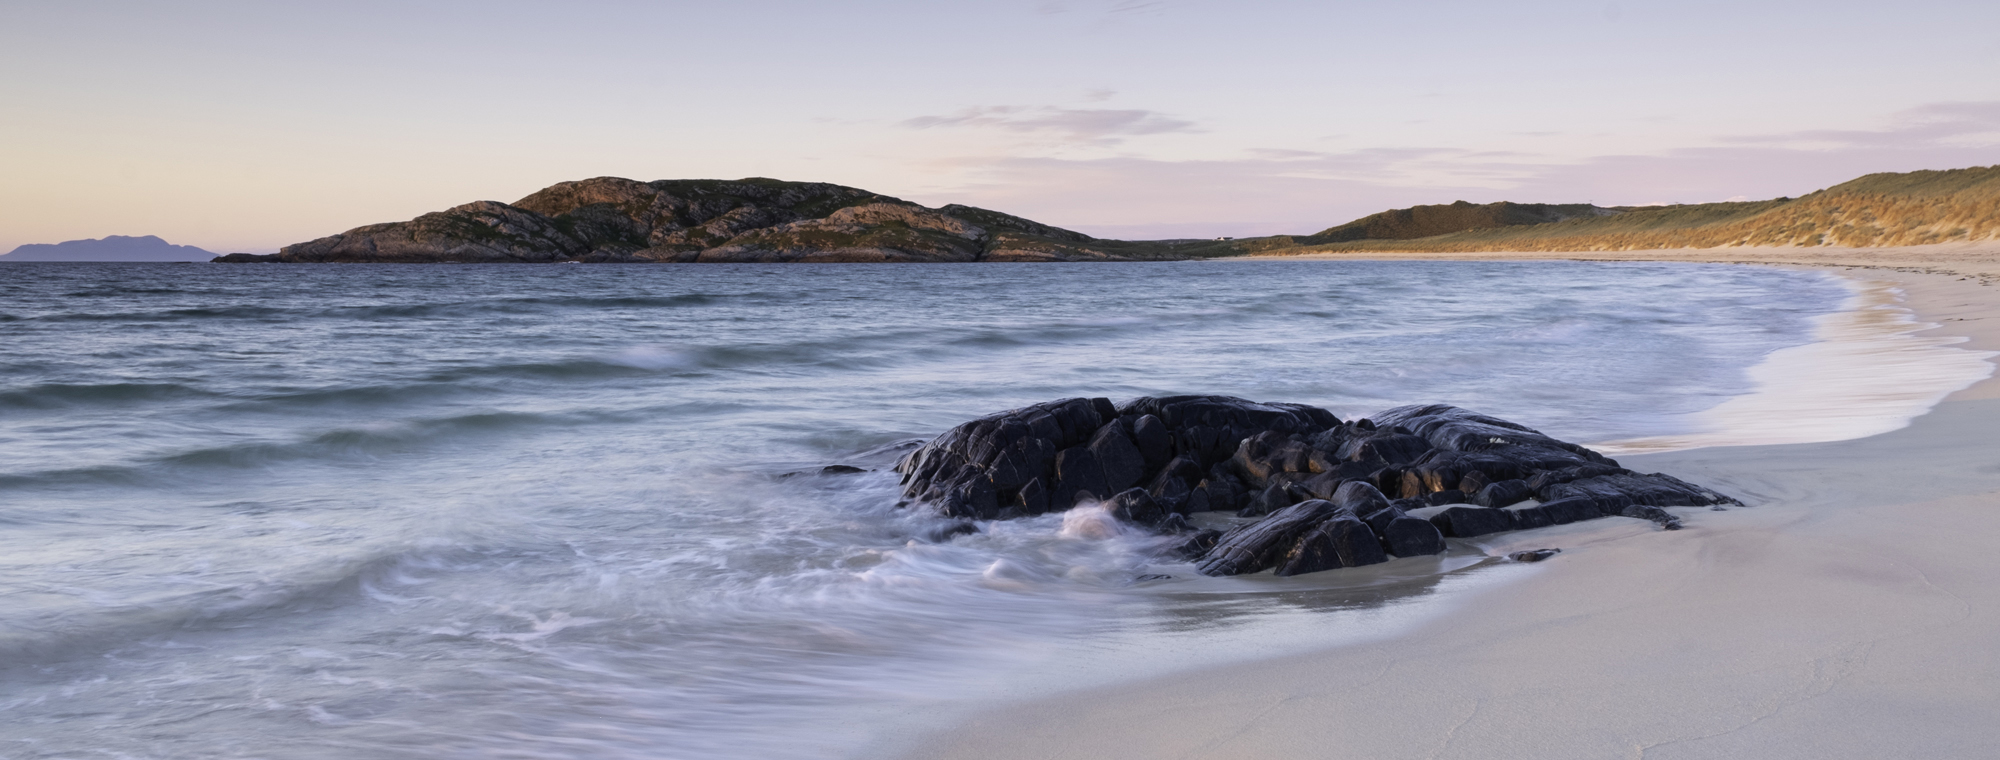 Landscape image taken of Feall Bay, Isle of Coll at sunset